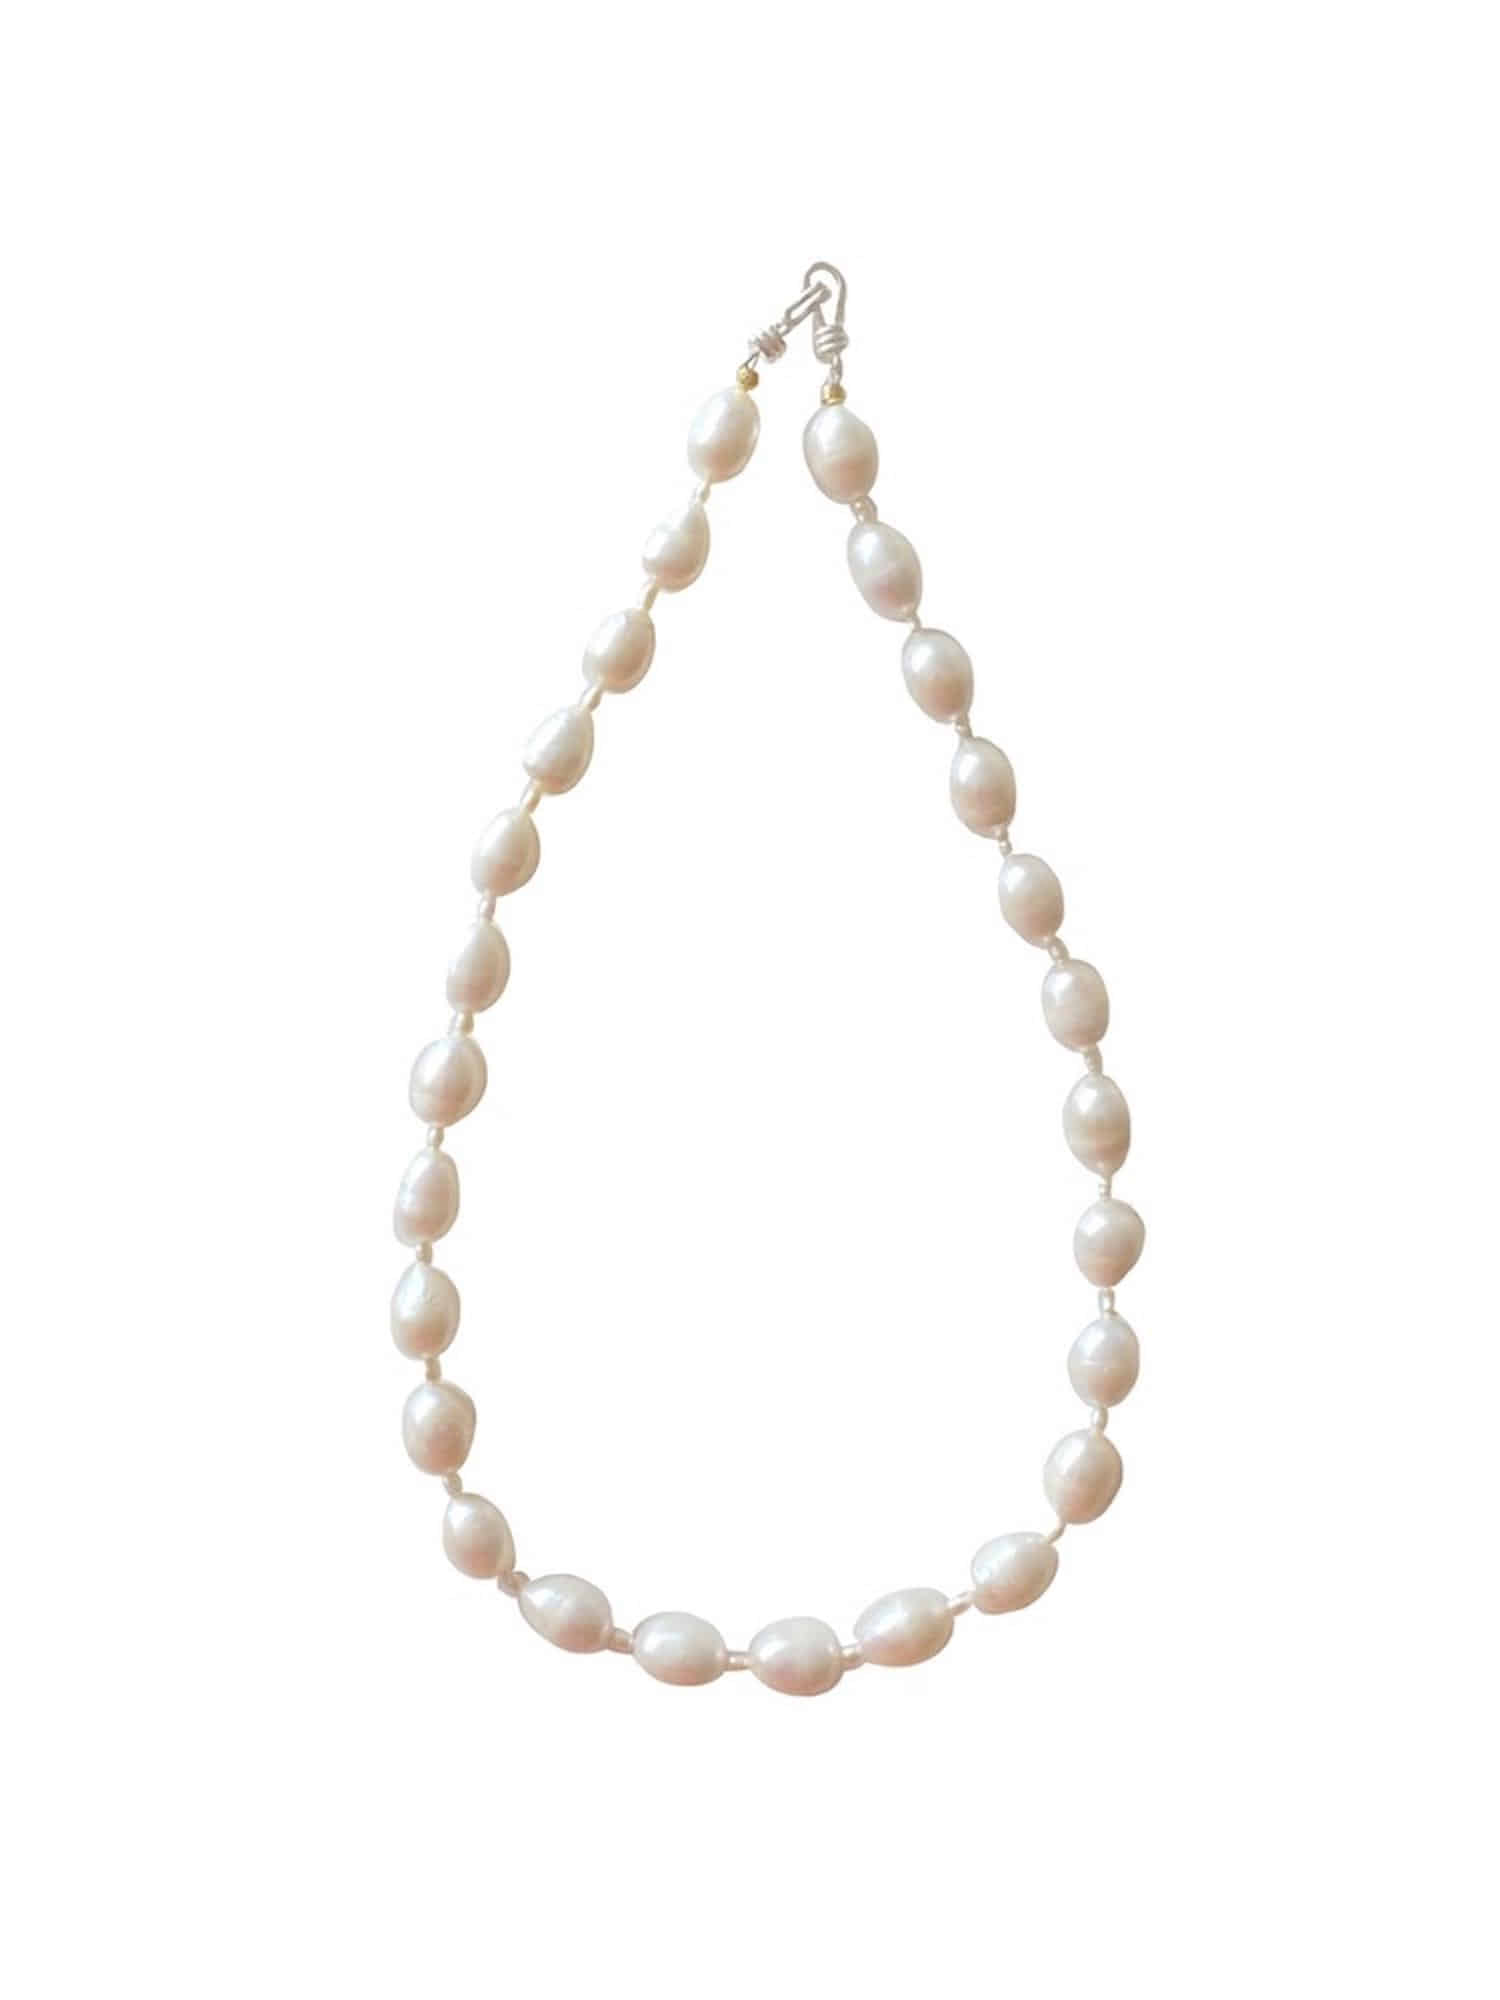 Ripple Pearl Necklace